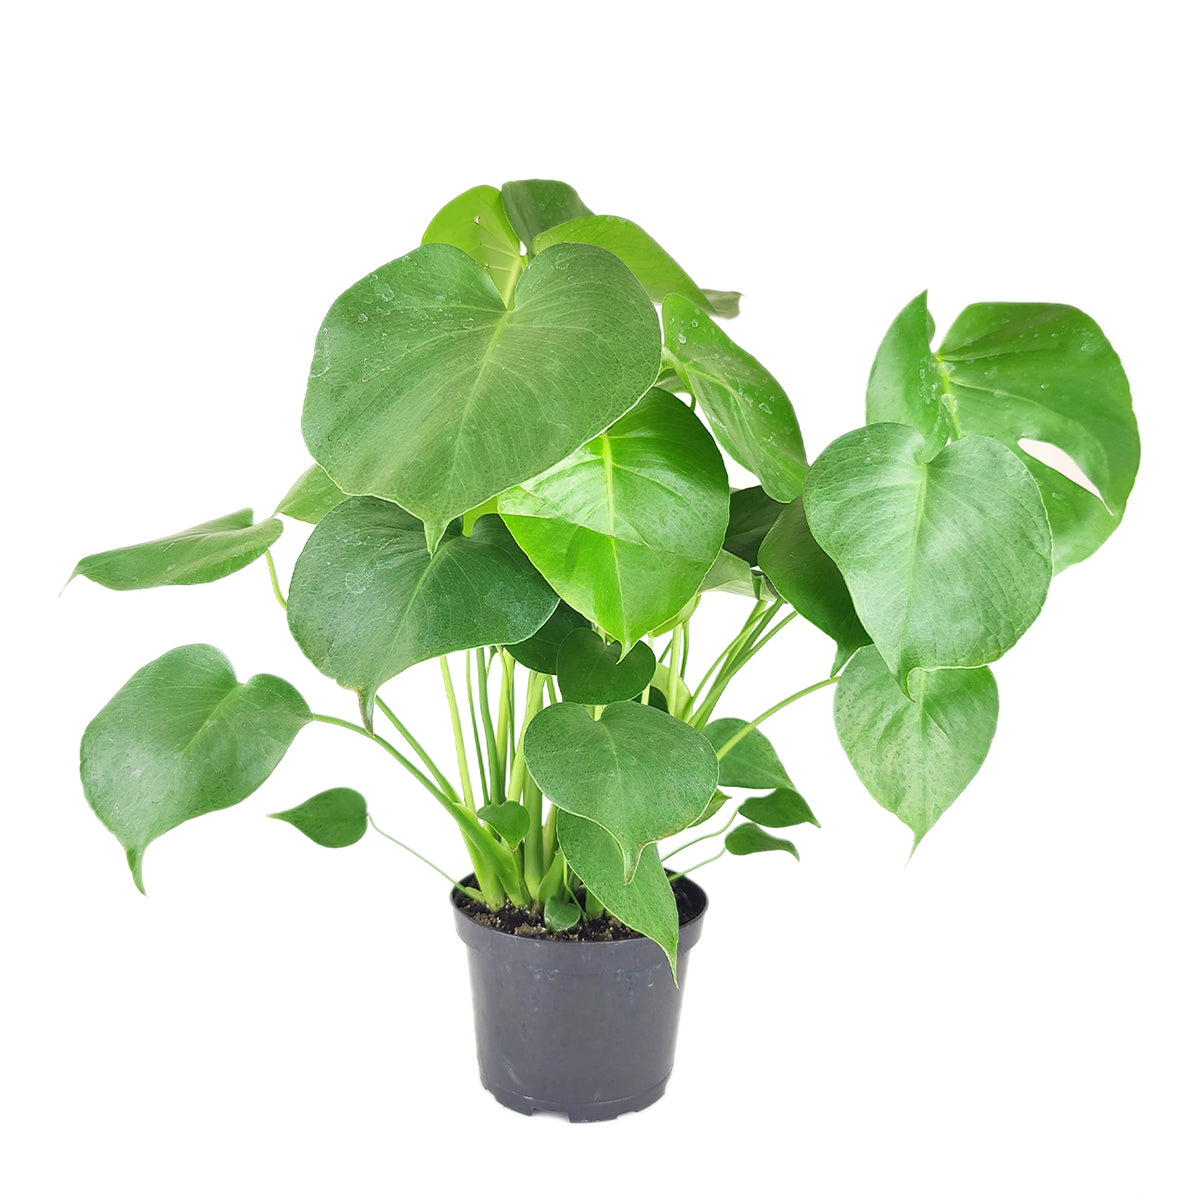 Monstera deliciosa, Swiss cheese plant, huge foliage houseplant, plant with leaf holes, split leaf plant, exotic tropical houseplant, air-purifying plant